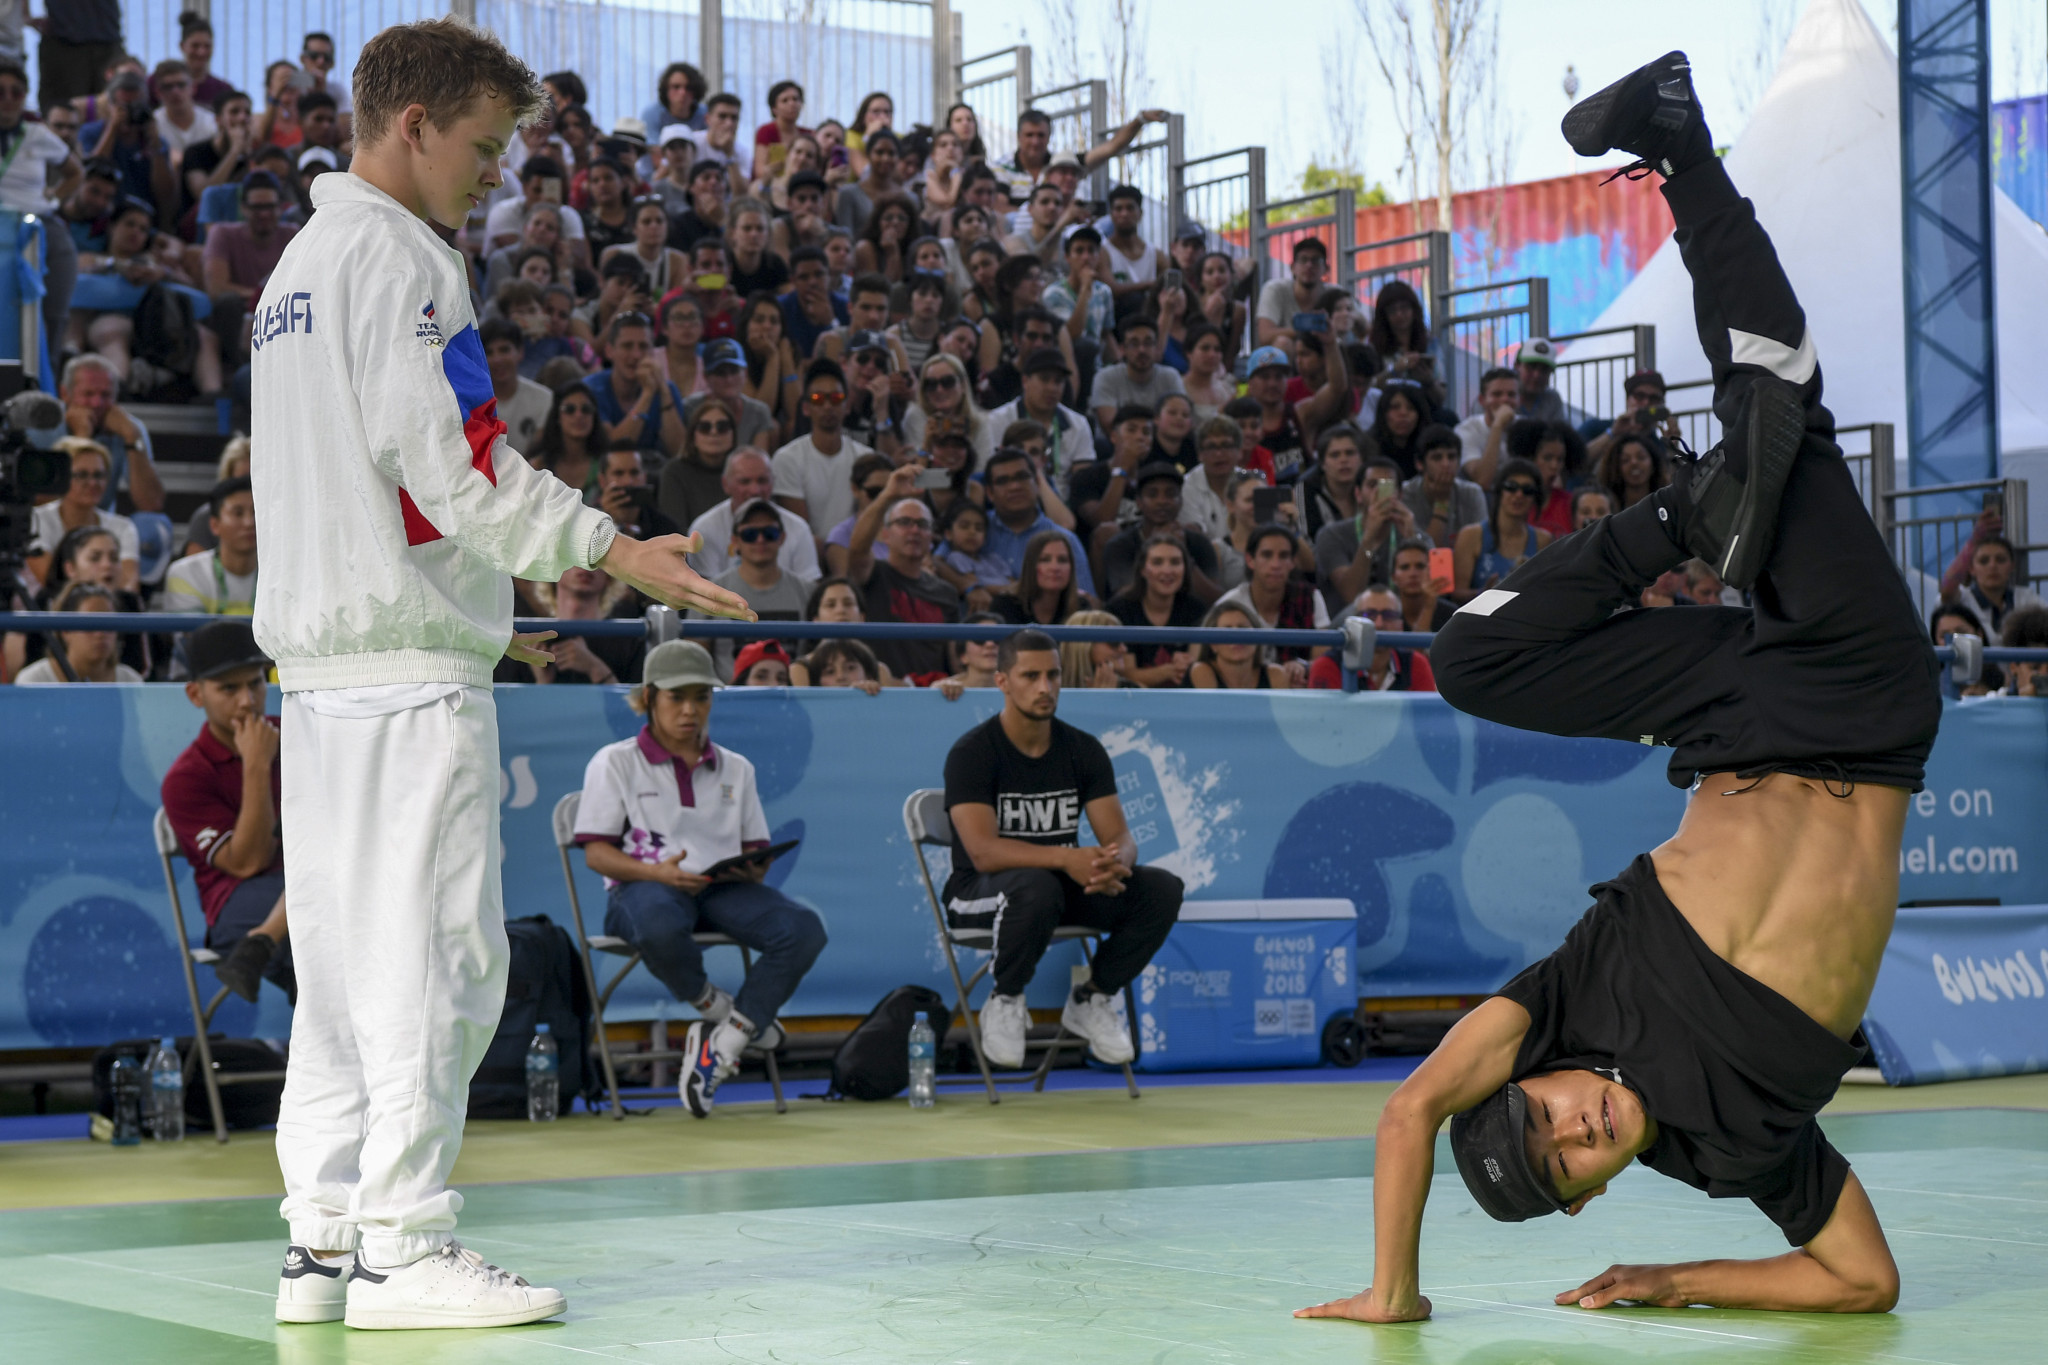 Breakdancing had good crowds at the Youth Olympics and enjoyed a strong following on social media ©Getty Images